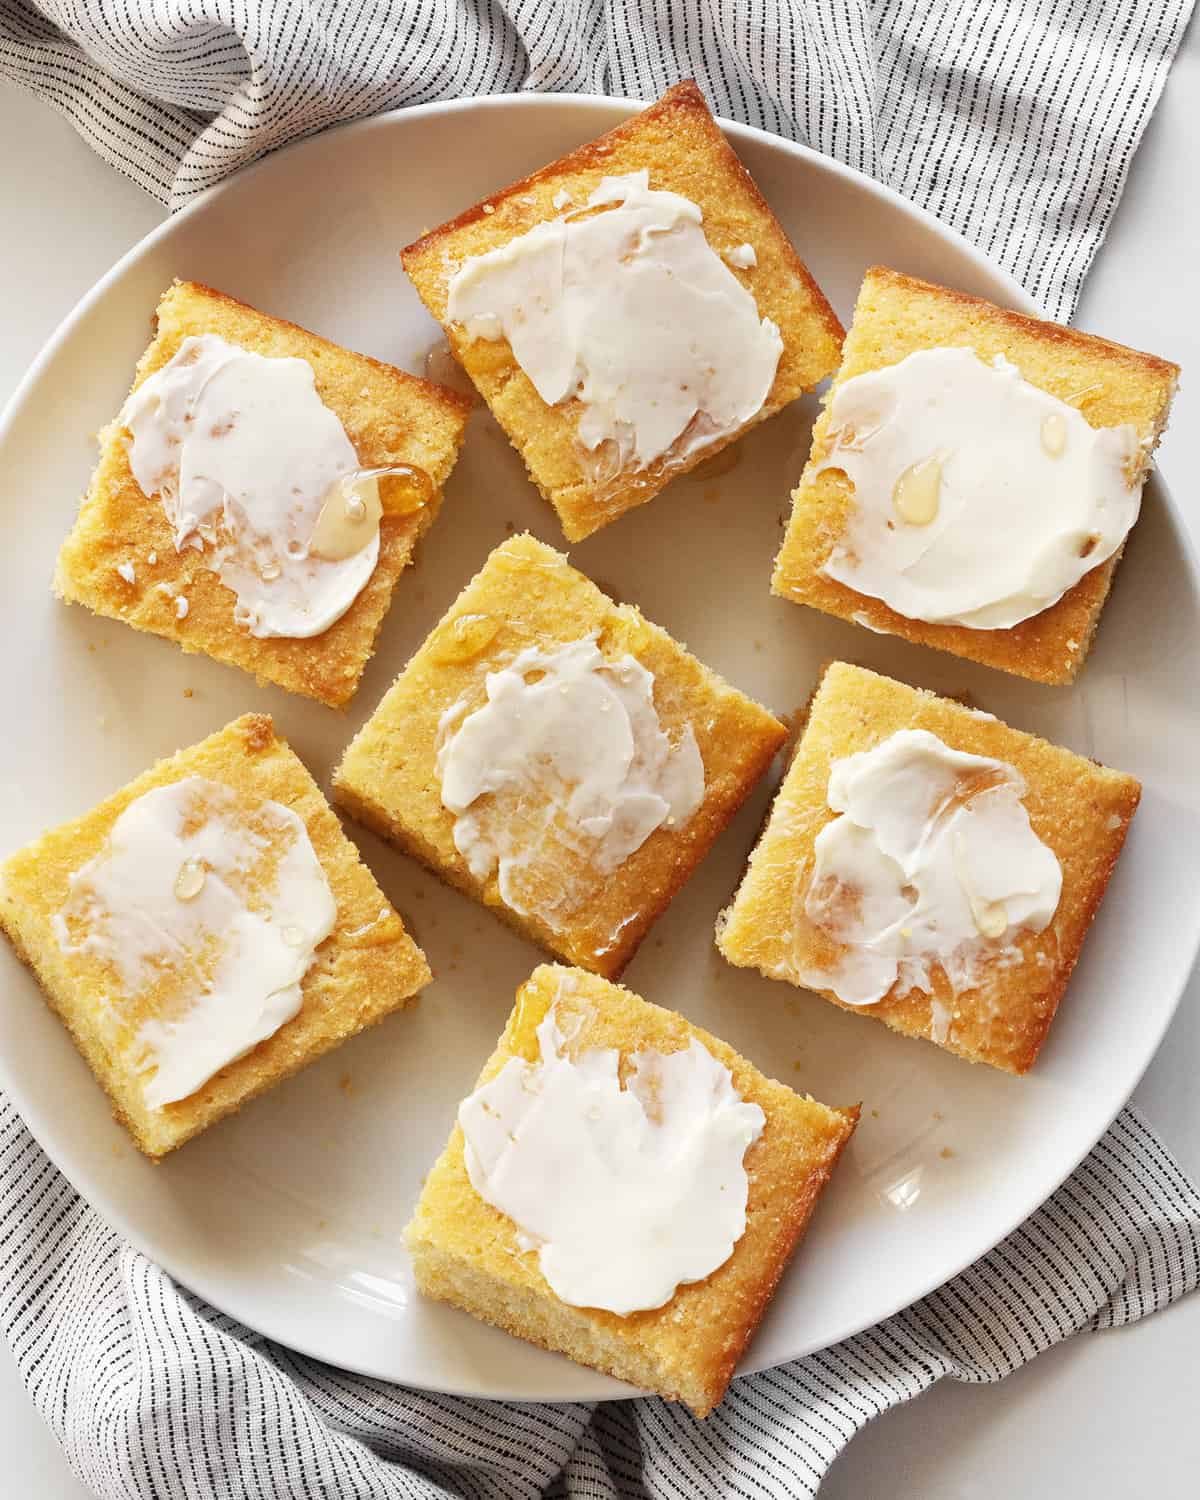 Cornbread cut into squares with the tops spread with butter and drizzled with honey.